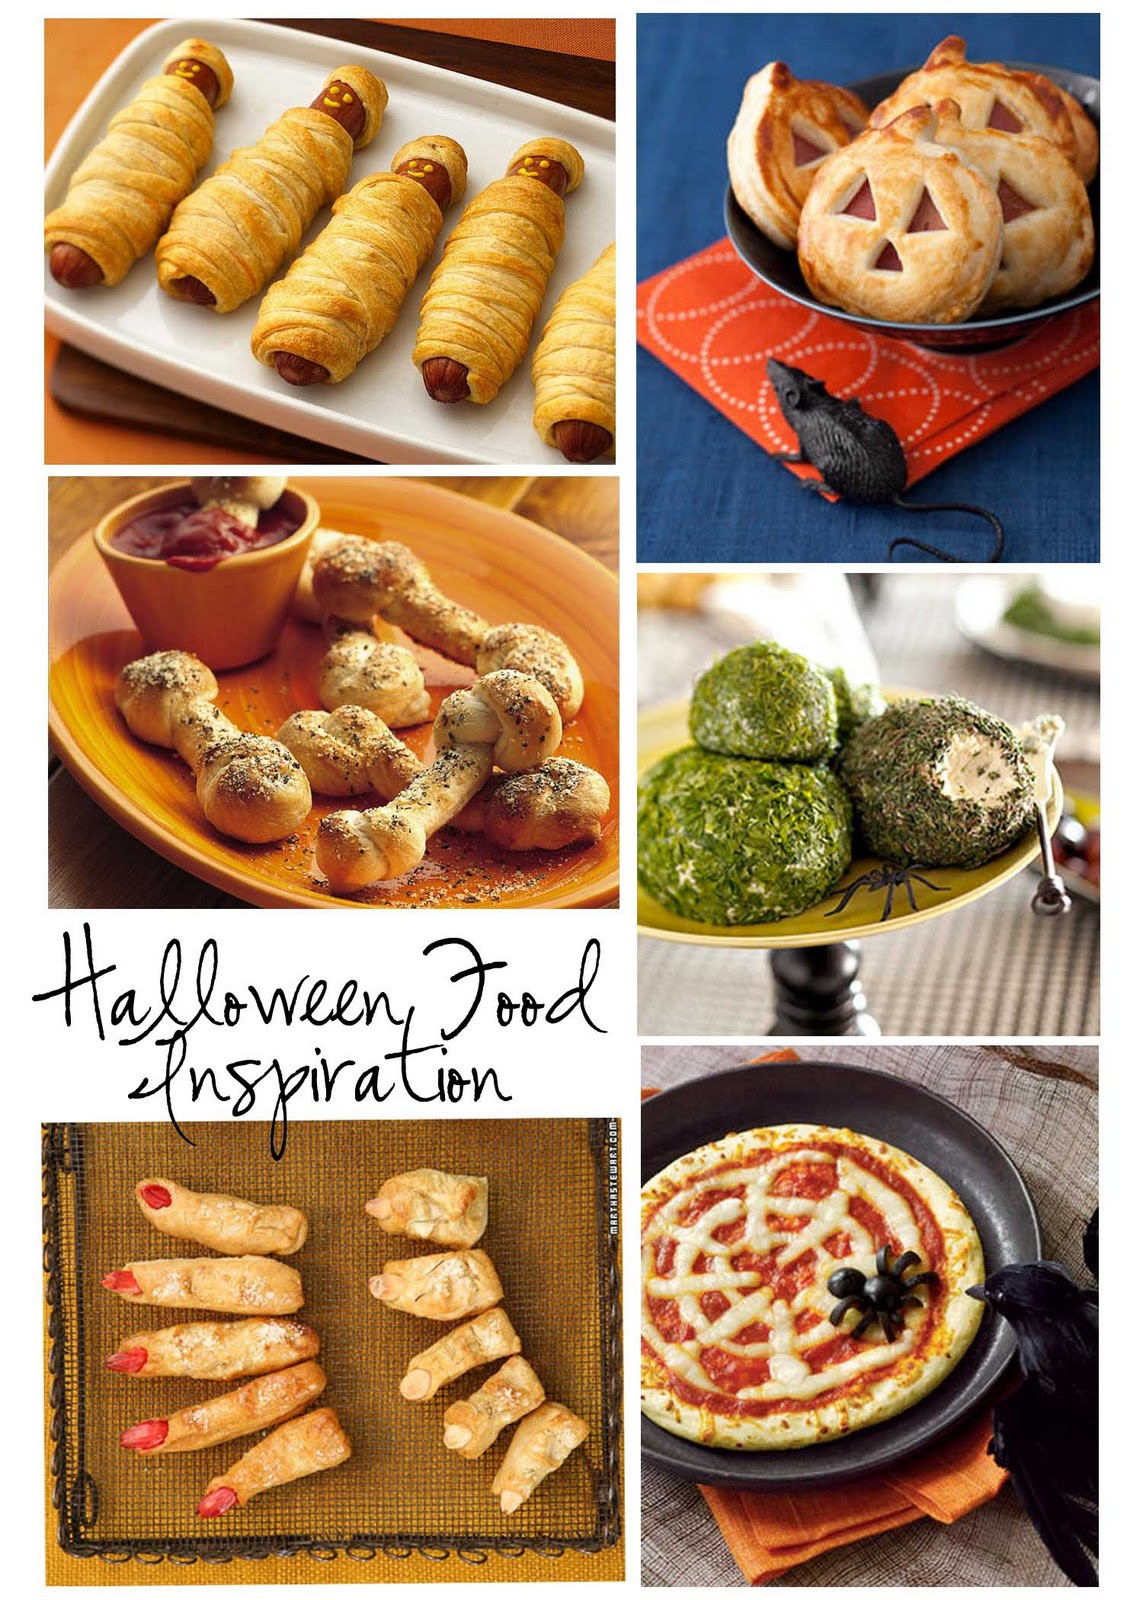 Halloween Food For Parties
 Room to Inspire Spooky Food Ideas